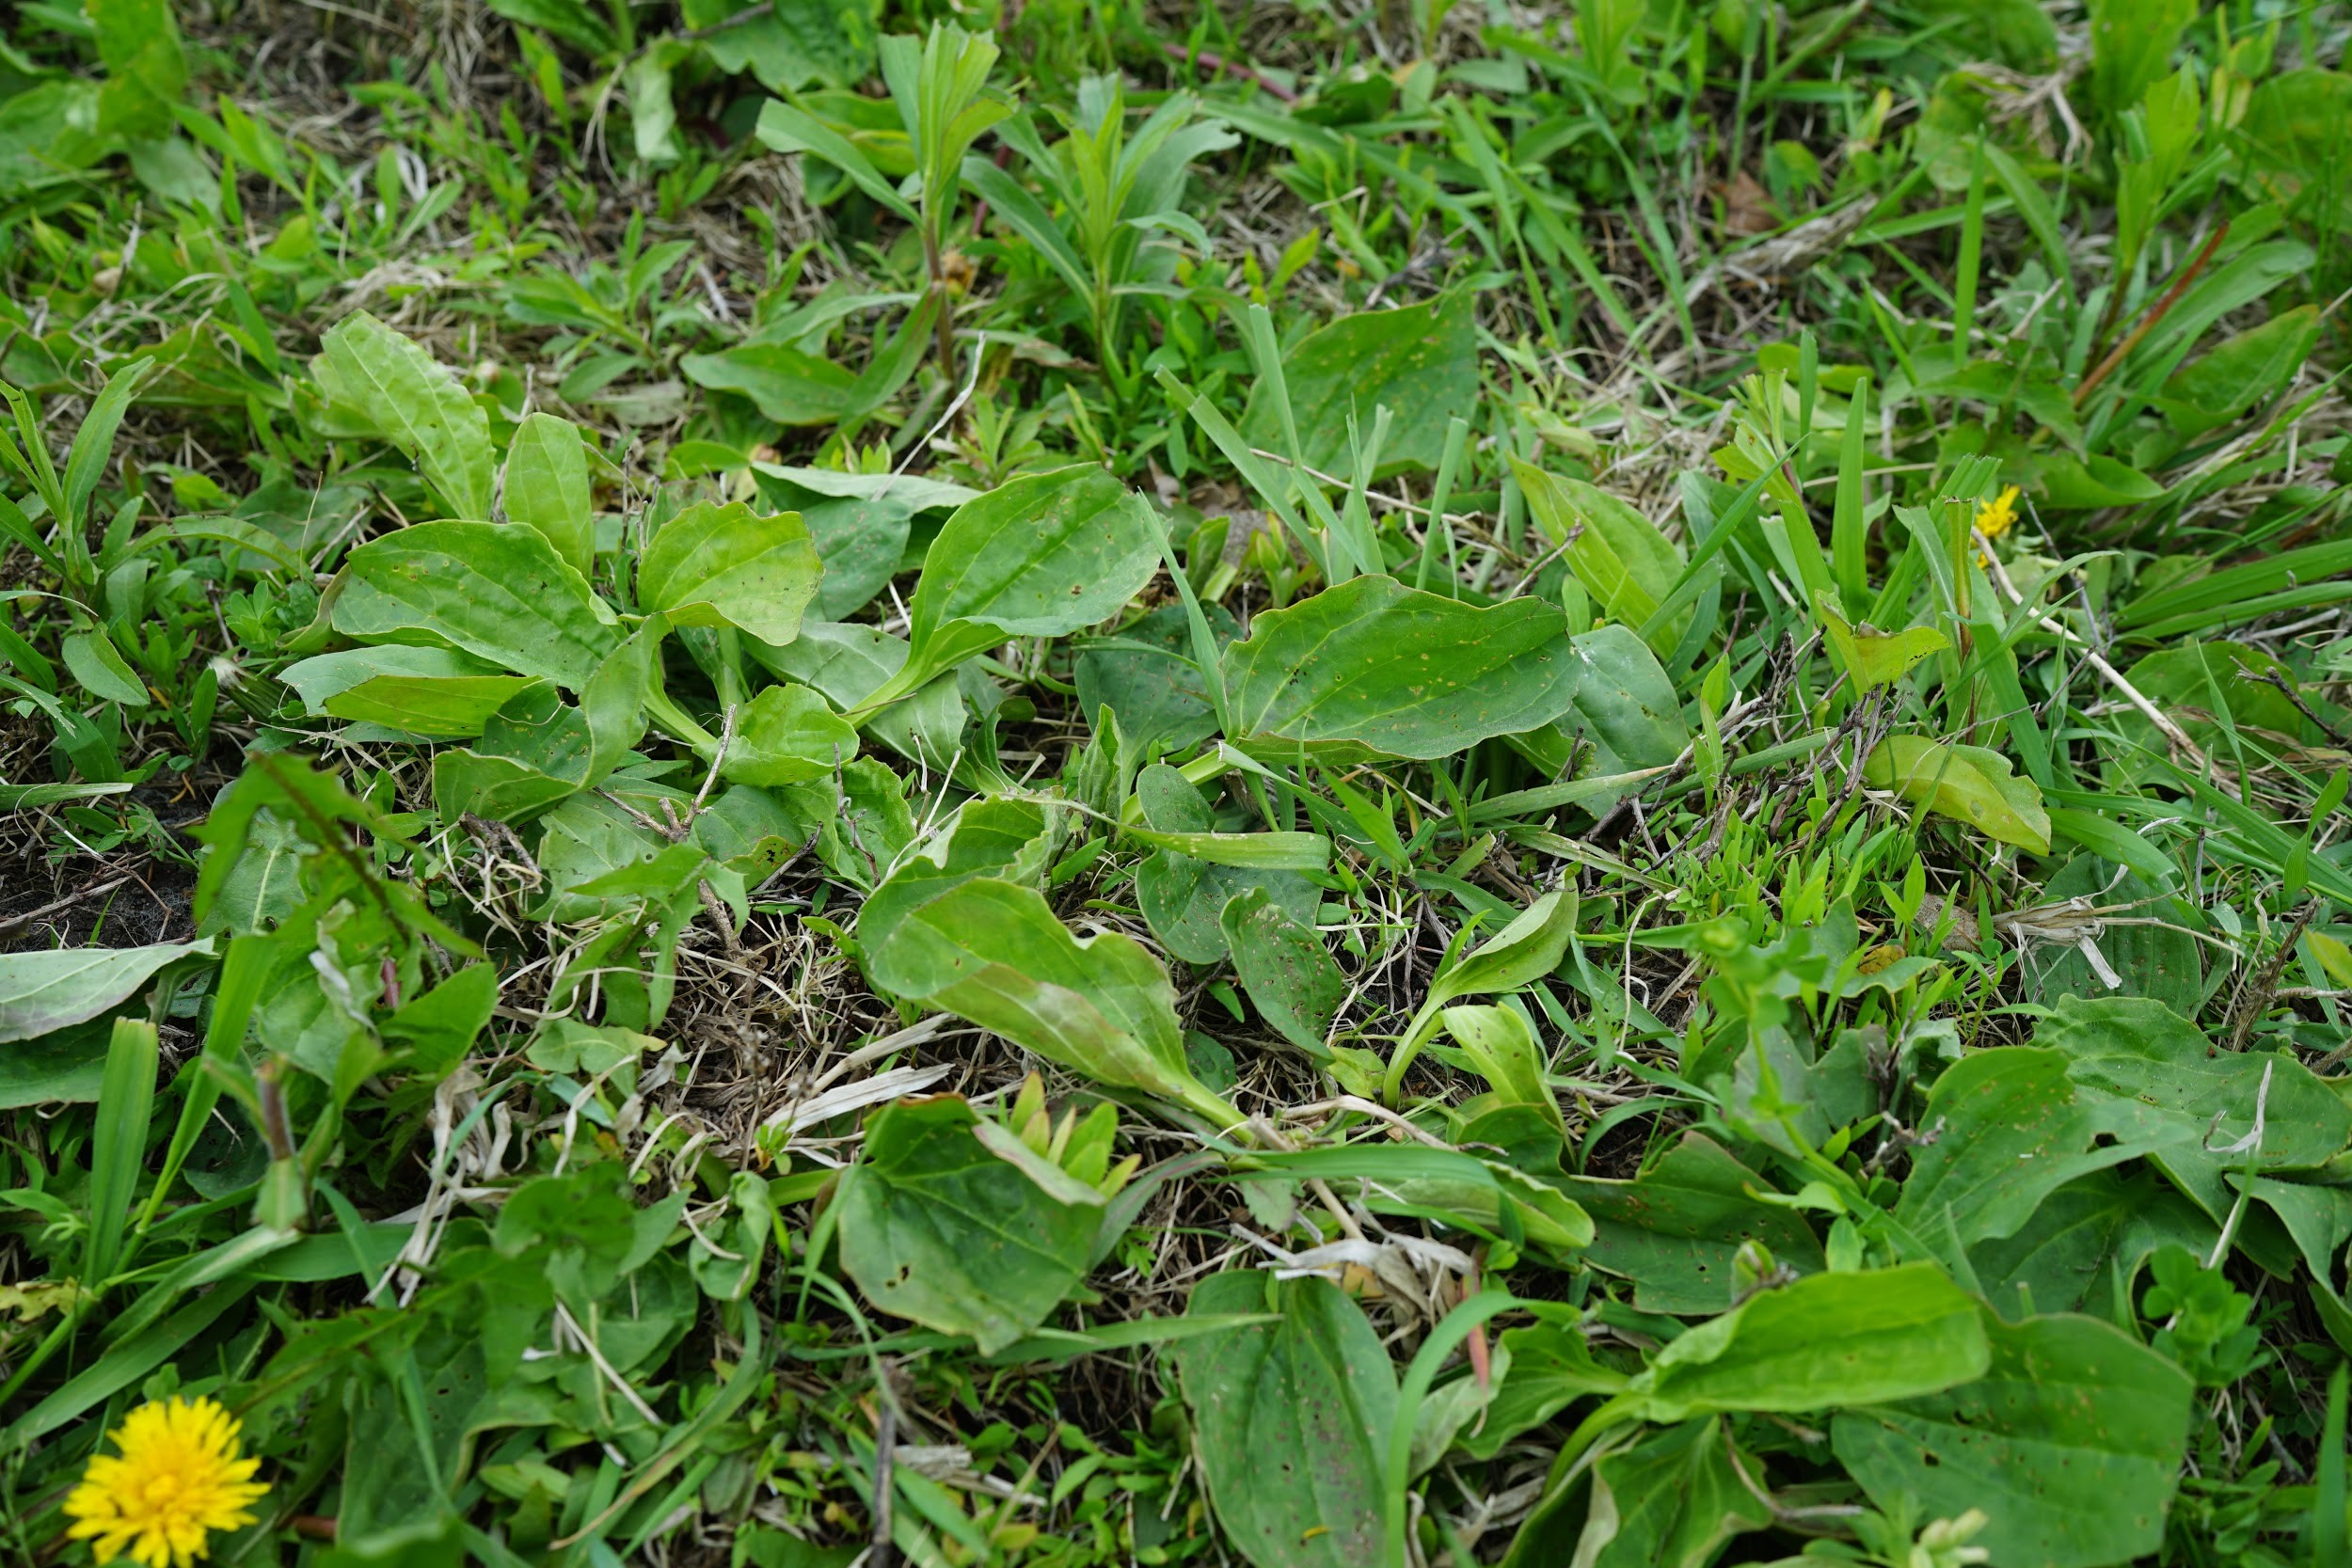 broadleaf plantain plants growing among other weeds